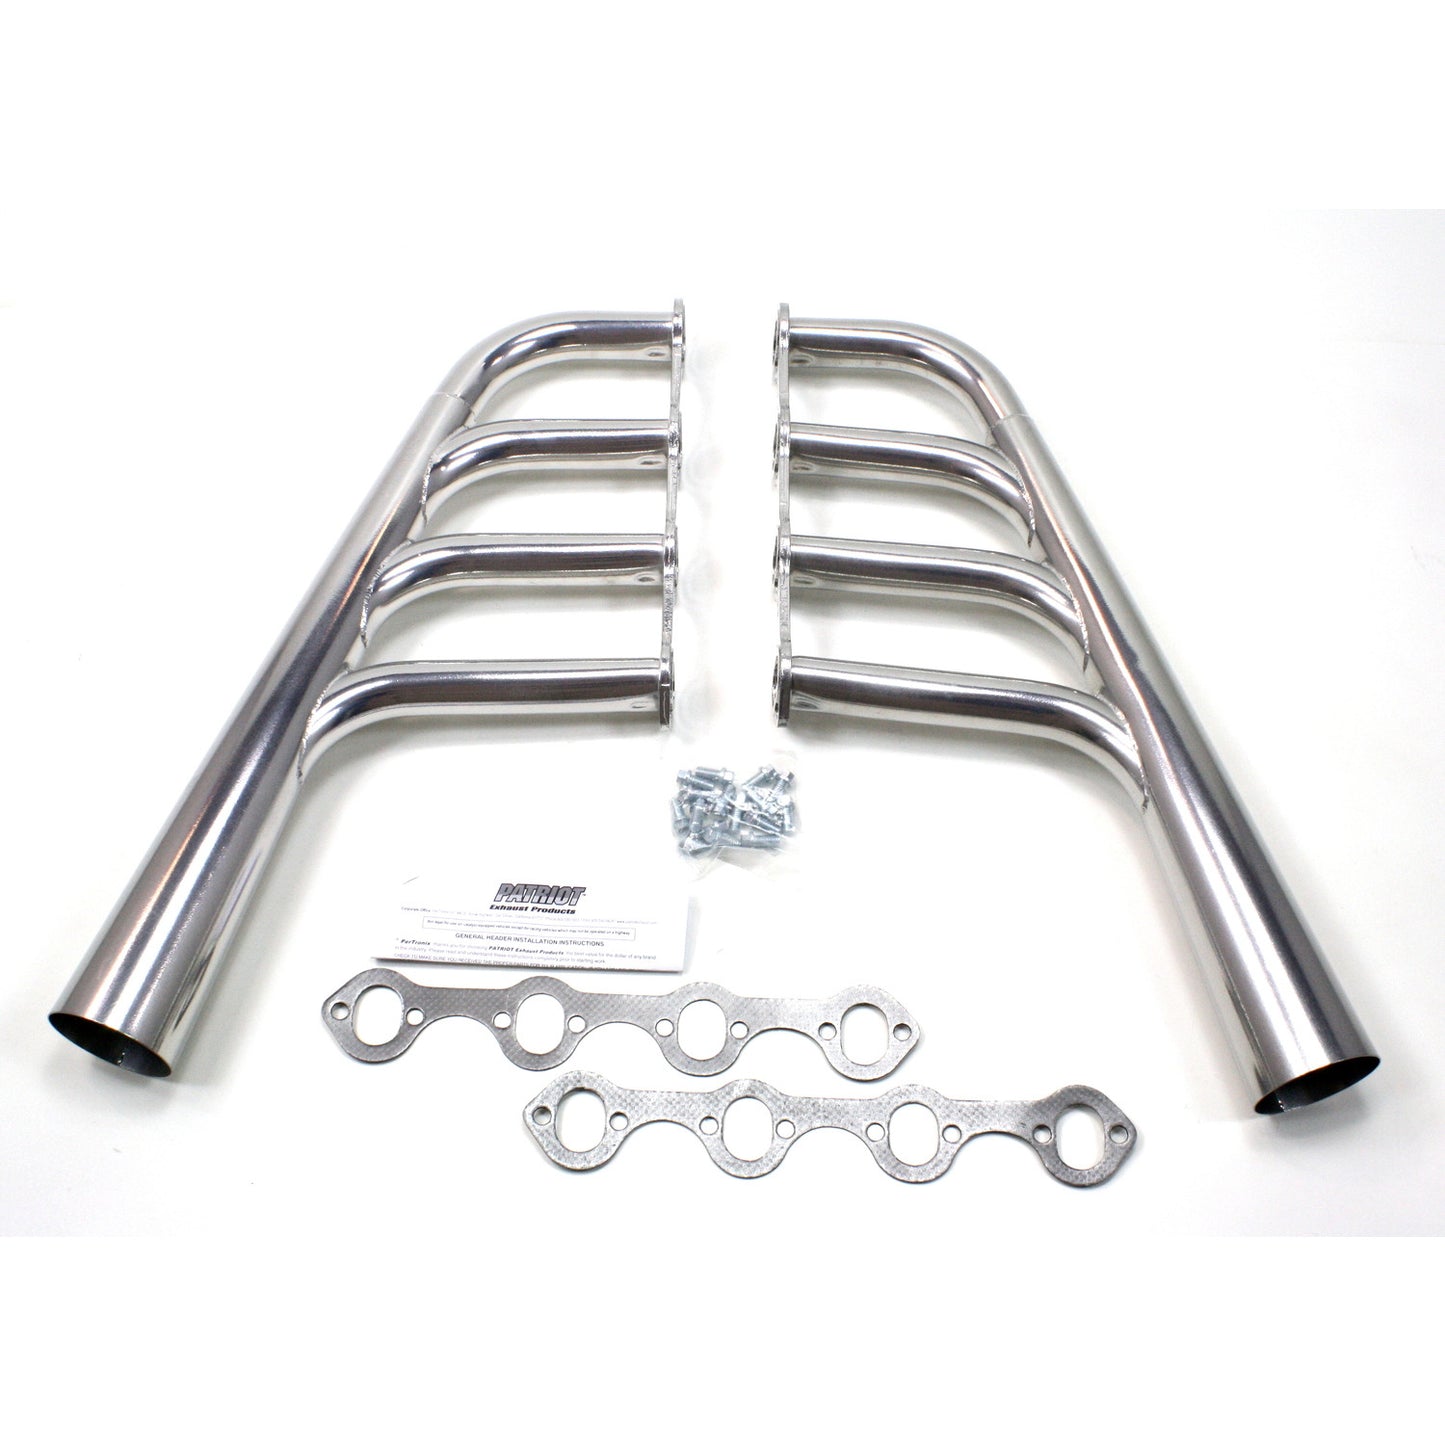 Patriot Exhaust H8471-1 1 5/8"x3 1/2" Traditional Lakester Header Street Rod Small Block Ford Metallic Ceramic Coating